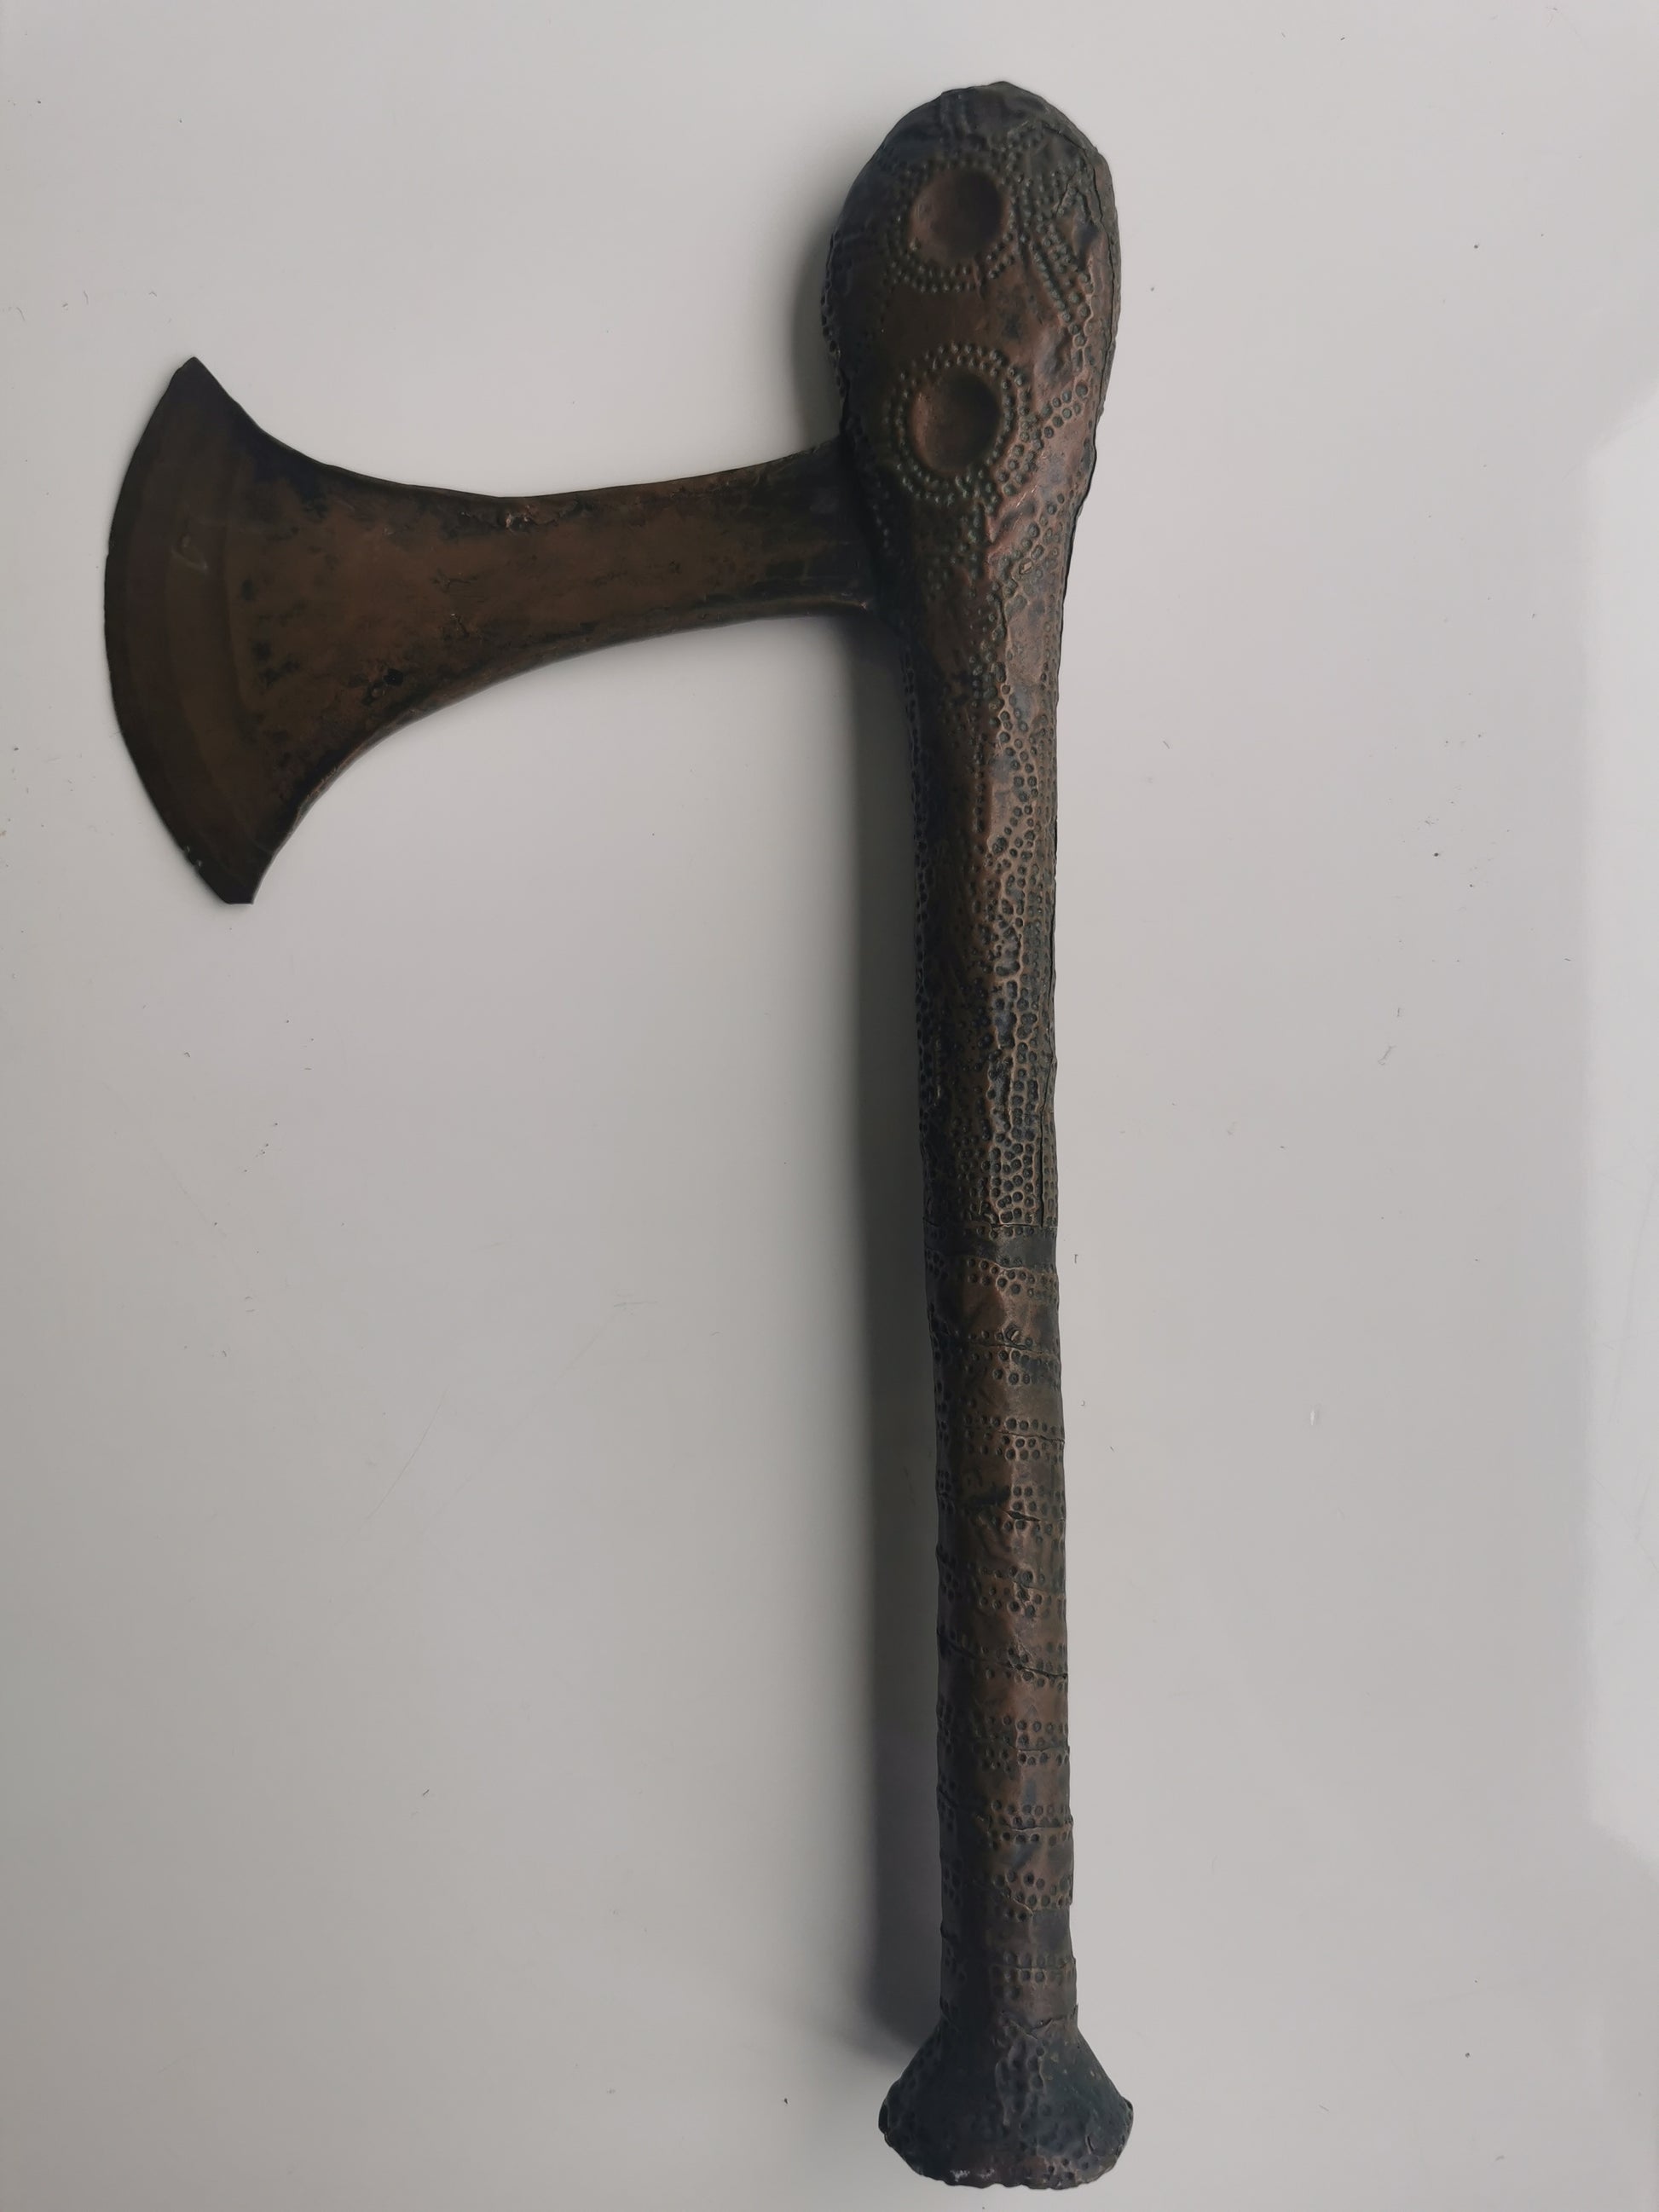 African Tribal Sapo Songye Ceremonial Axe made of wood and copper